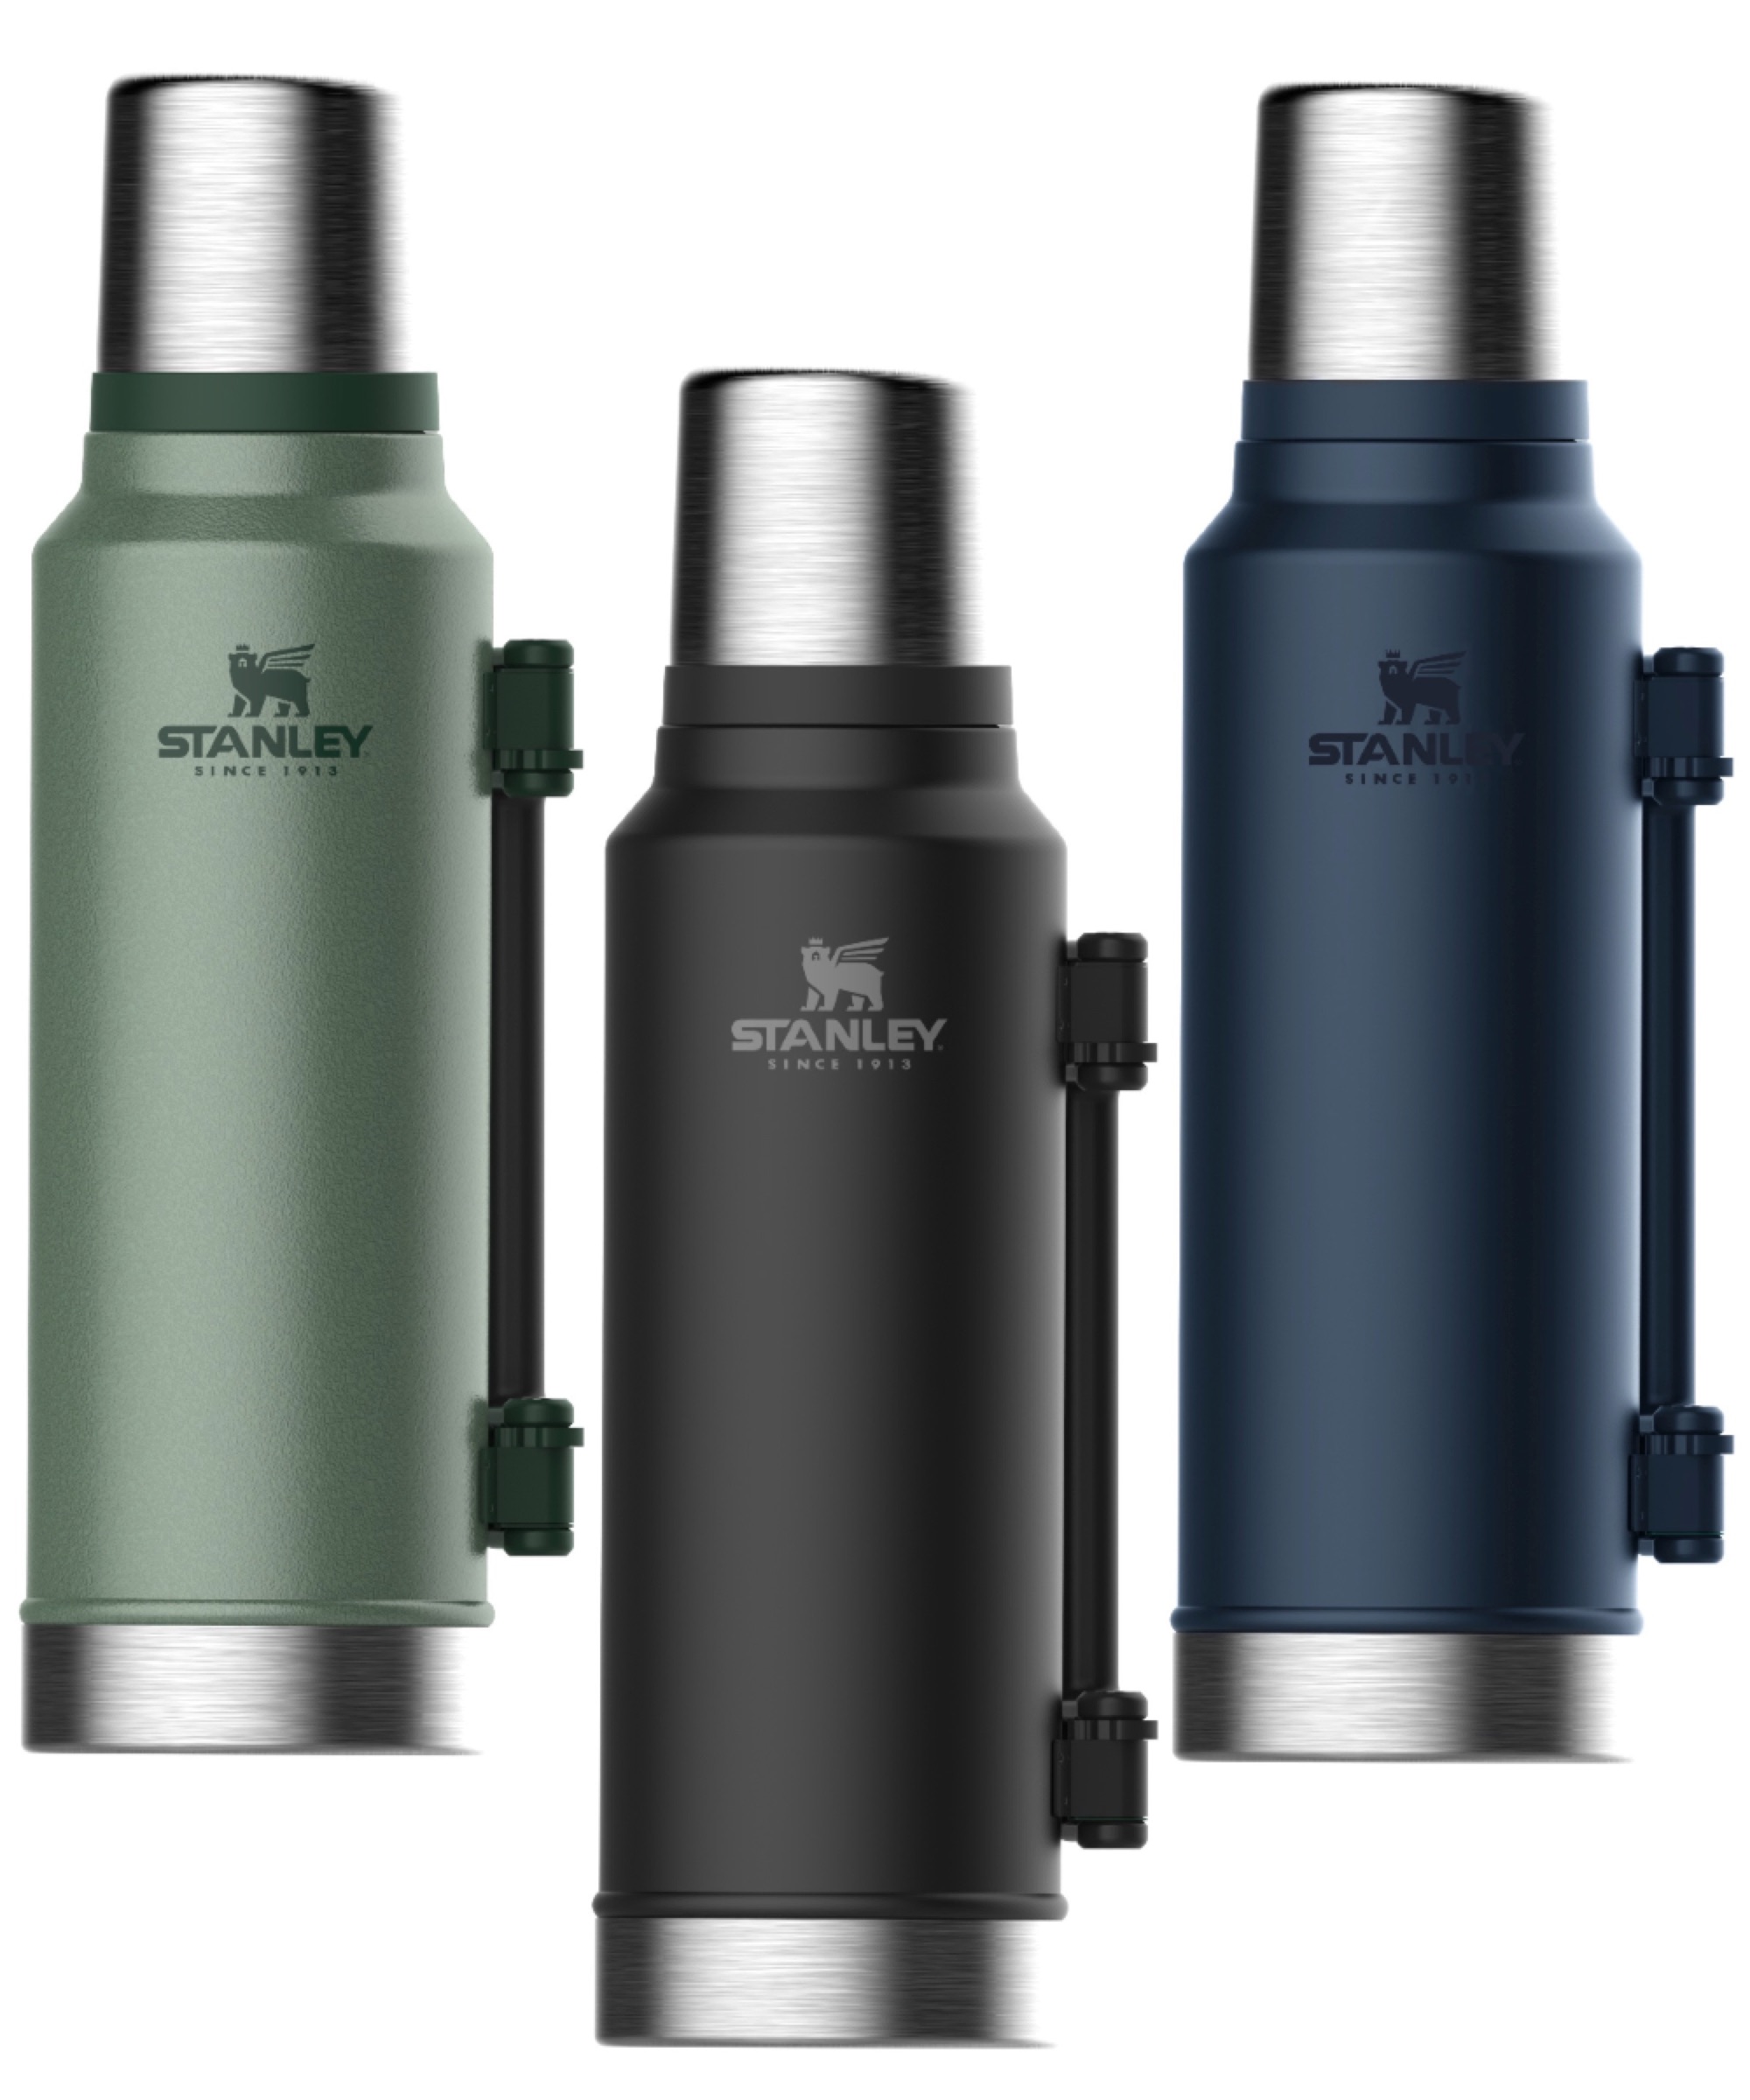 http://www.traveluniverse.com.au/Shared/Images/Product/Stanley-Classic-1-4-Litre-Vacuum-Insulated-Bottle/88415-group.jpg